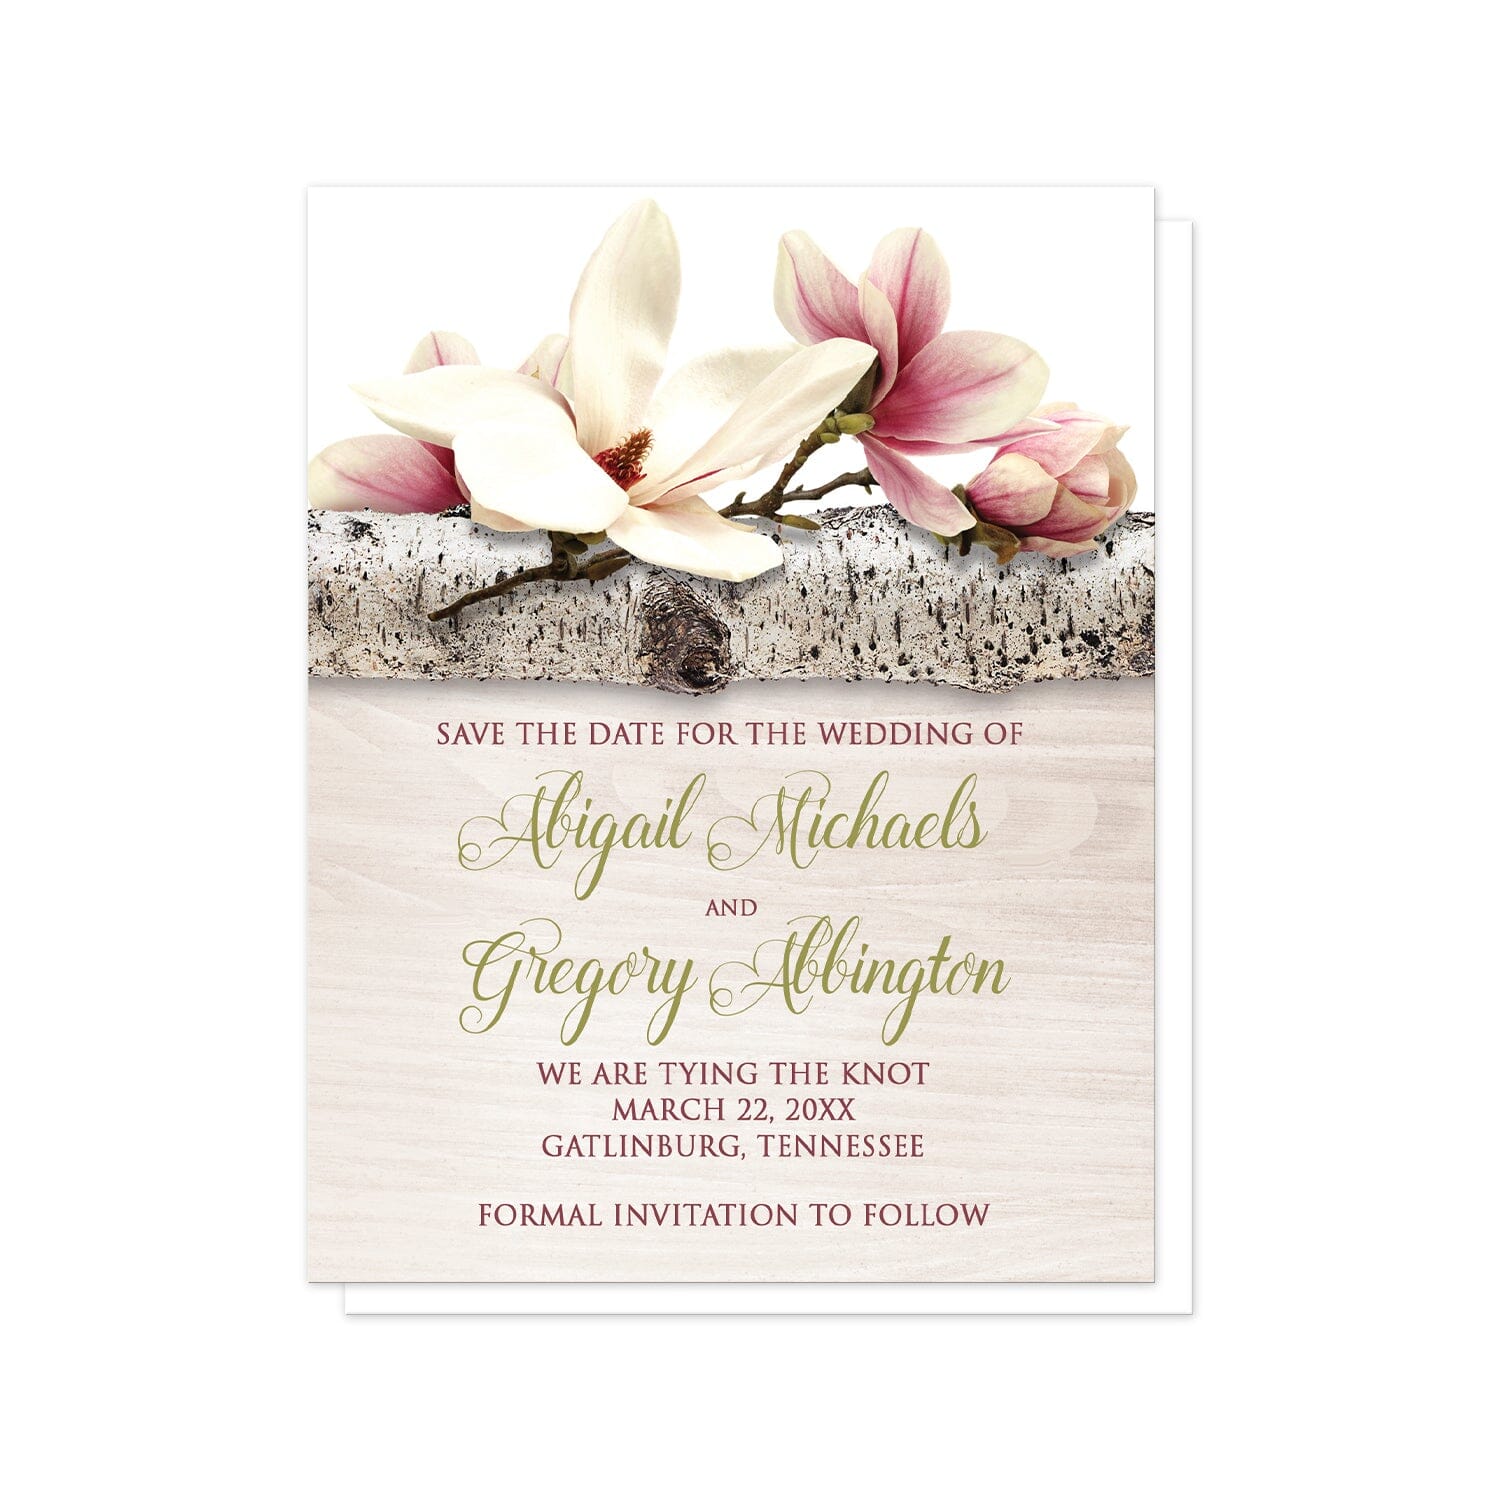 Magnolia Birch Light Wood Floral Save the Date Cards at Artistically Invited. Beautiful magnolia birch light wood floral save the date cards with pink and white magnolia flowers laying on a birch tree branch along the top. Your personalized wedding date announcement details are custom printed in dark pink and light olive green over a light wood background illustration.